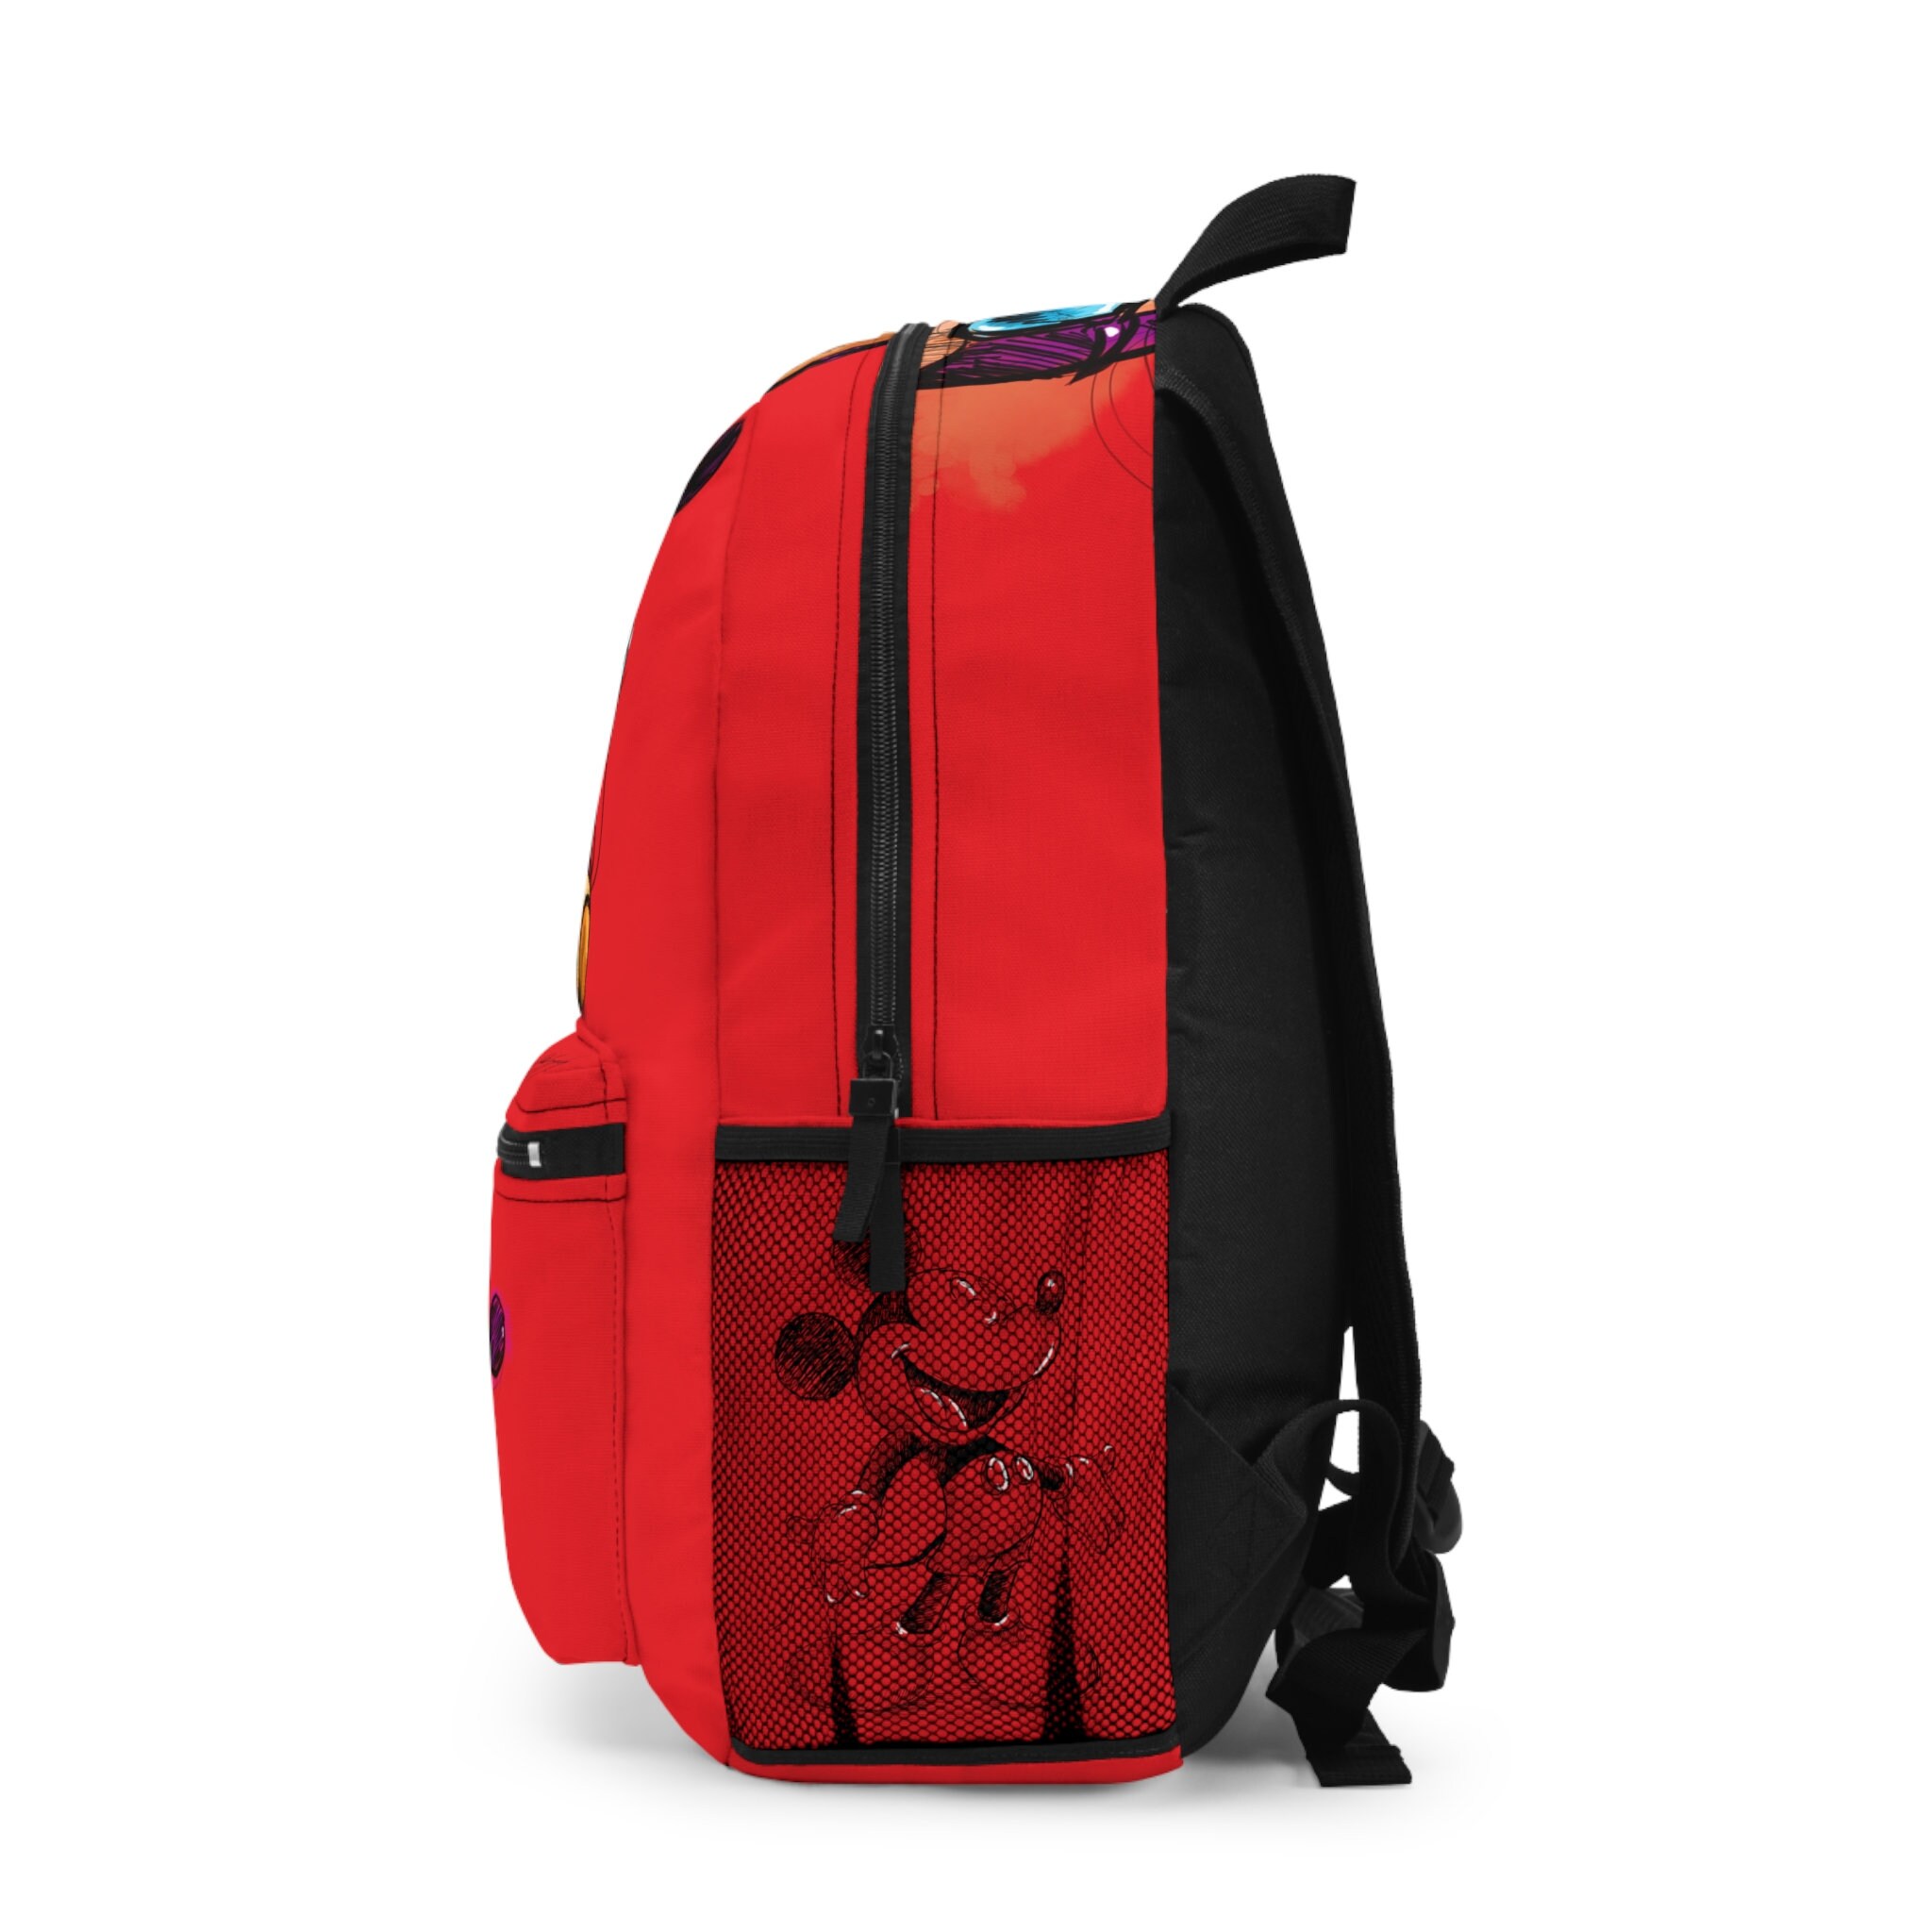 Mickey Mouse Red Kids Shool Backpack, Disney Red Design on Unisex Bag